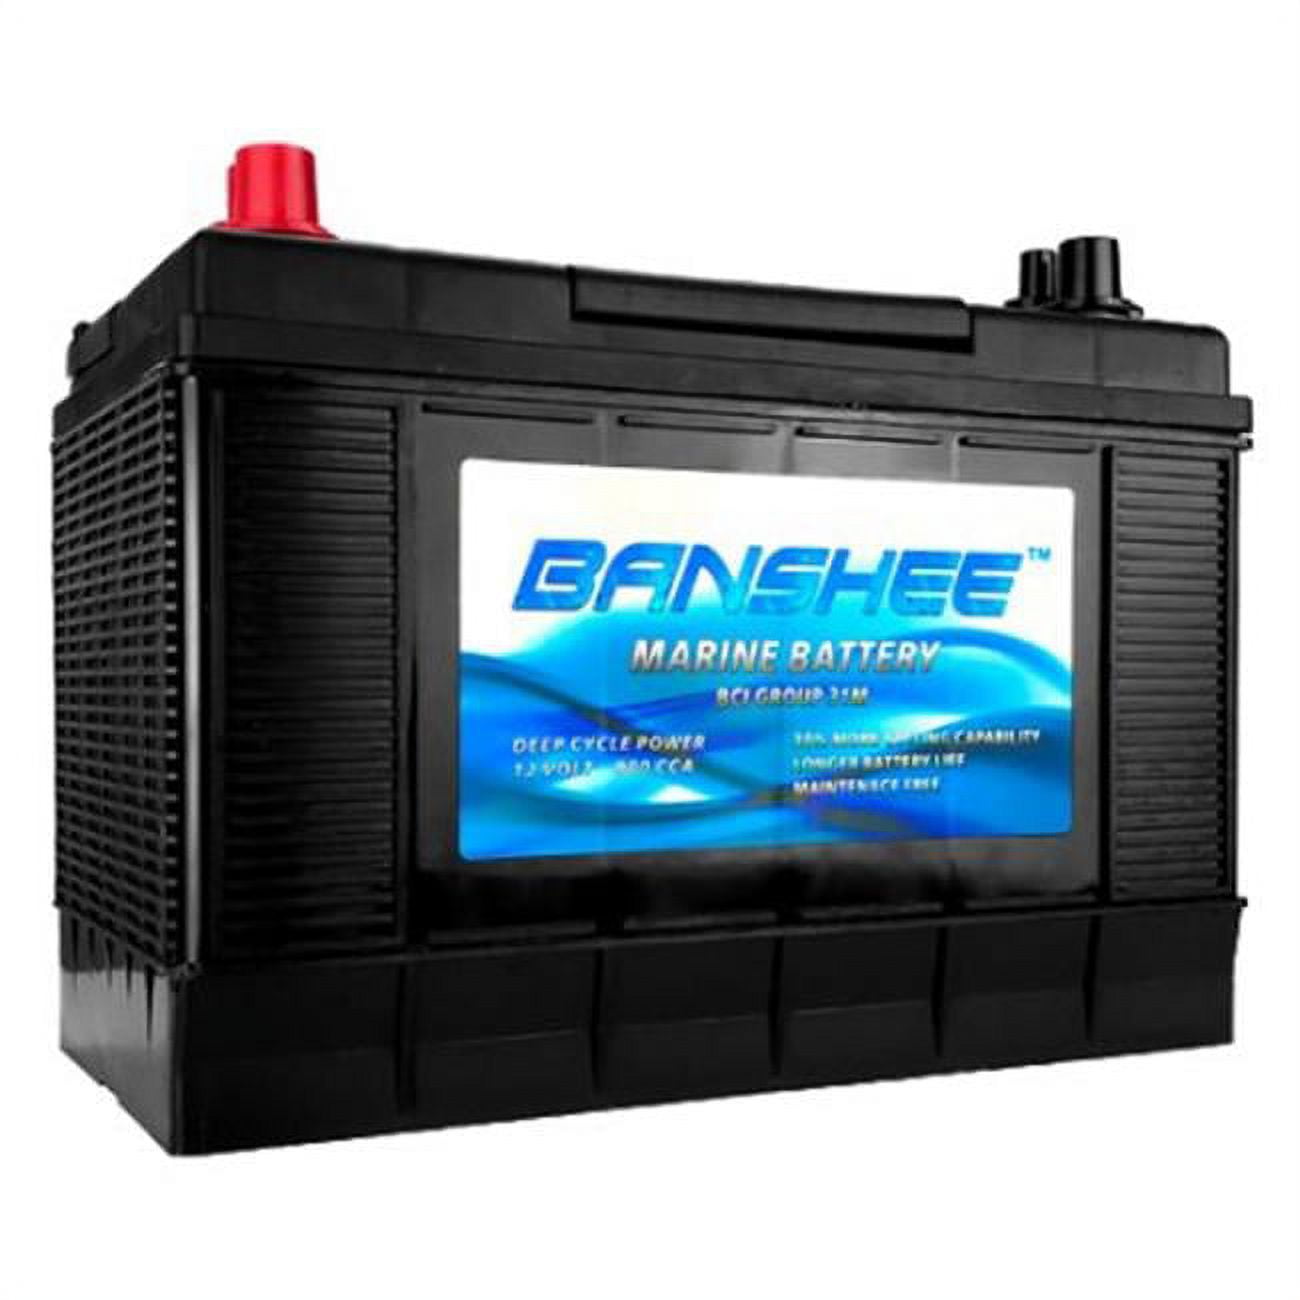 Picture of Banshee 31M-Banshee-8 AGM Deep Cycle Marine Group 31 Battery for Electric Trolling Motors